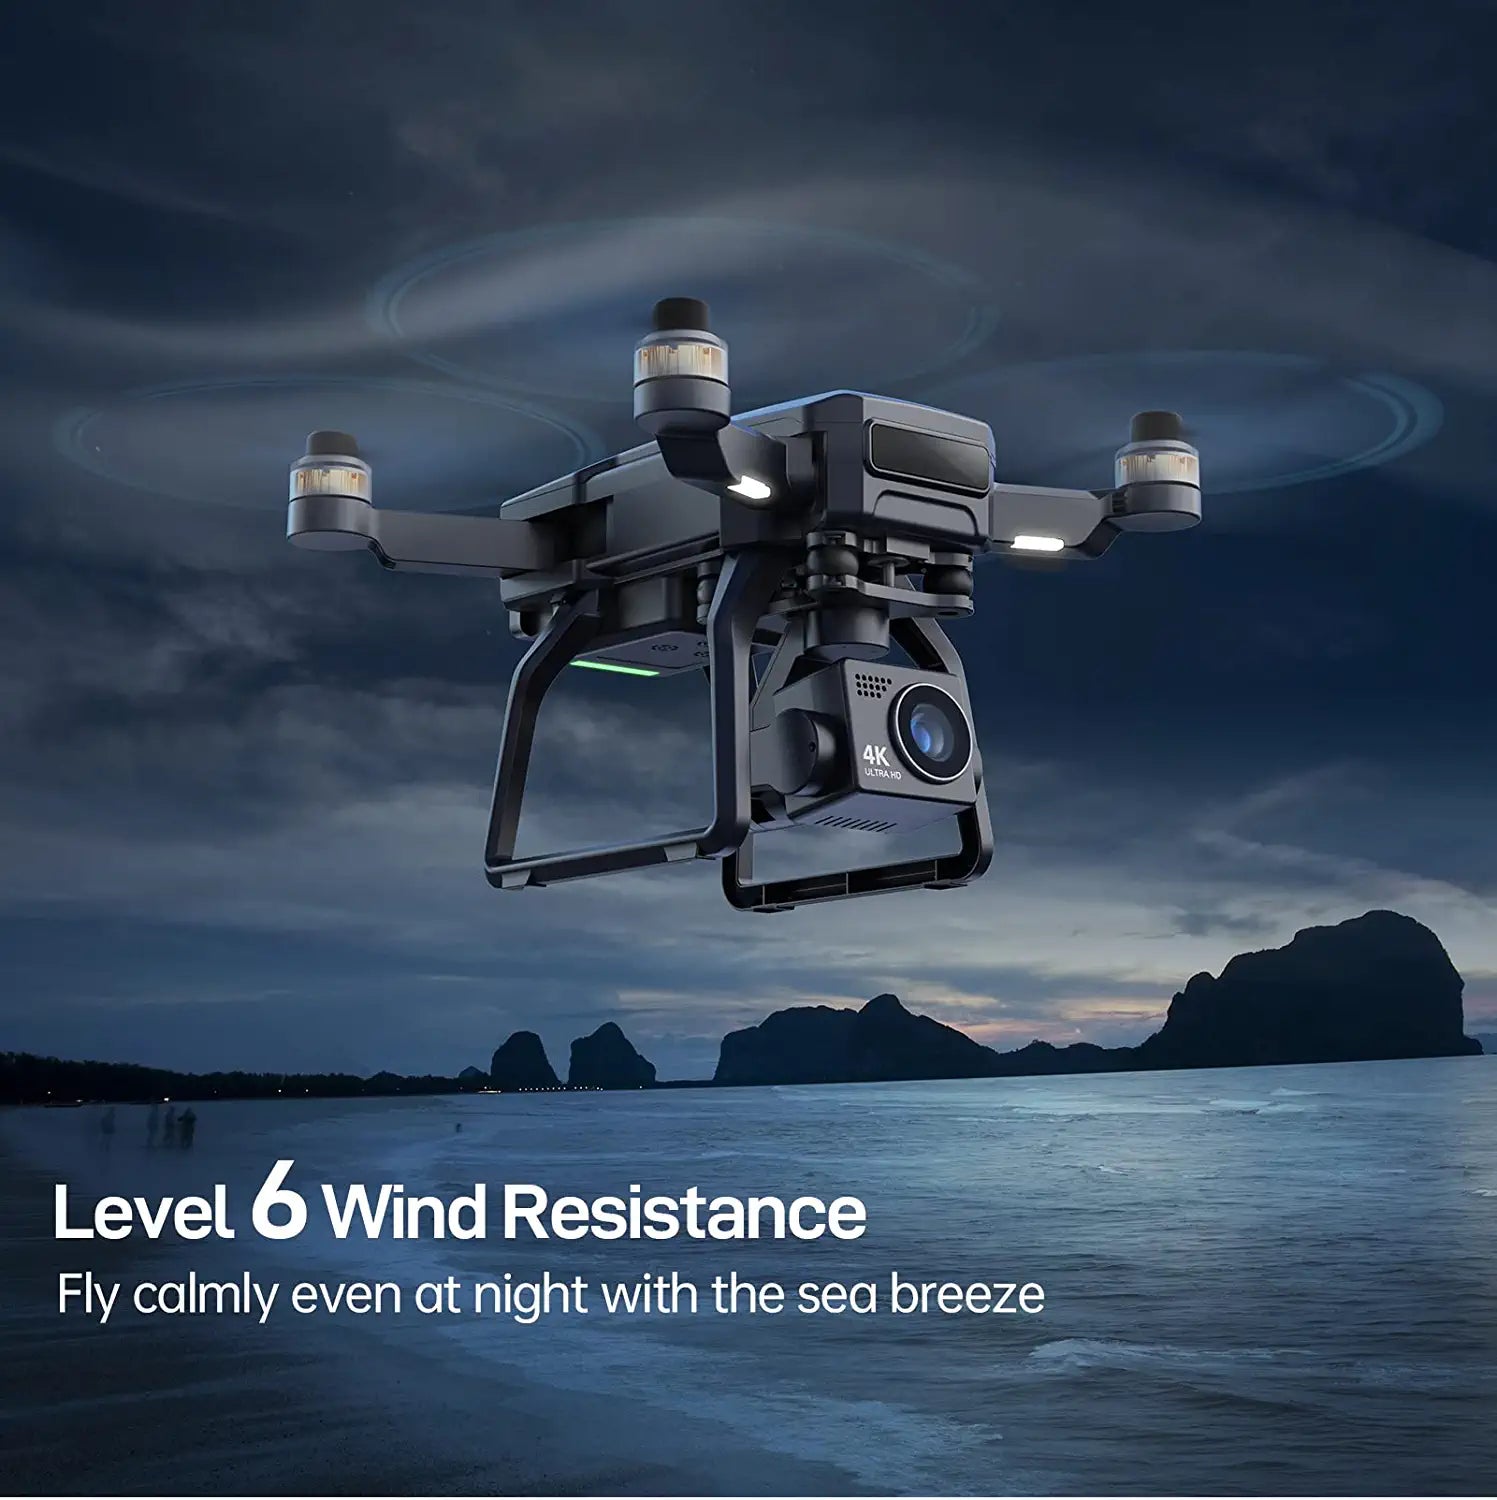 Bwine F7 Drone - with Camera for Adults 4K, 9800ft Video Transmission, Camera Drone with 3-Axis Gimbal, GPS Auto Return, Follow Me, Waypoints, Level 6 Wind Resistance, 2 Batteries for 50 Min Flight Time Professional Camera Drone - RCDrone